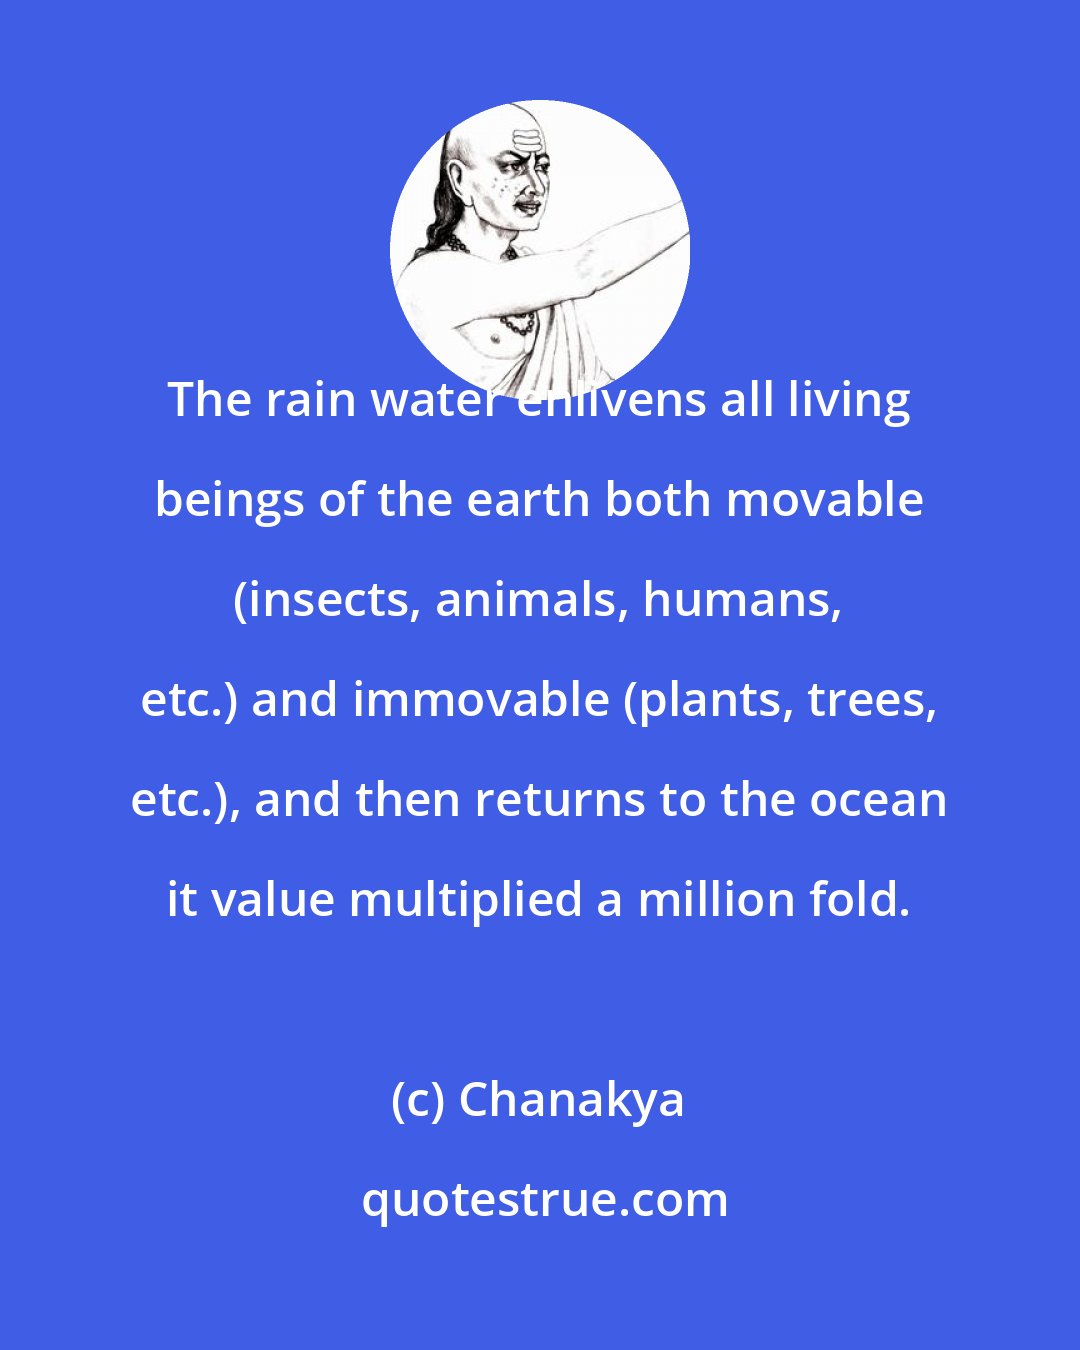 Chanakya: The rain water enlivens all living beings of the earth both movable (insects, animals, humans, etc.) and immovable (plants, trees, etc.), and then returns to the ocean it value multiplied a million fold.